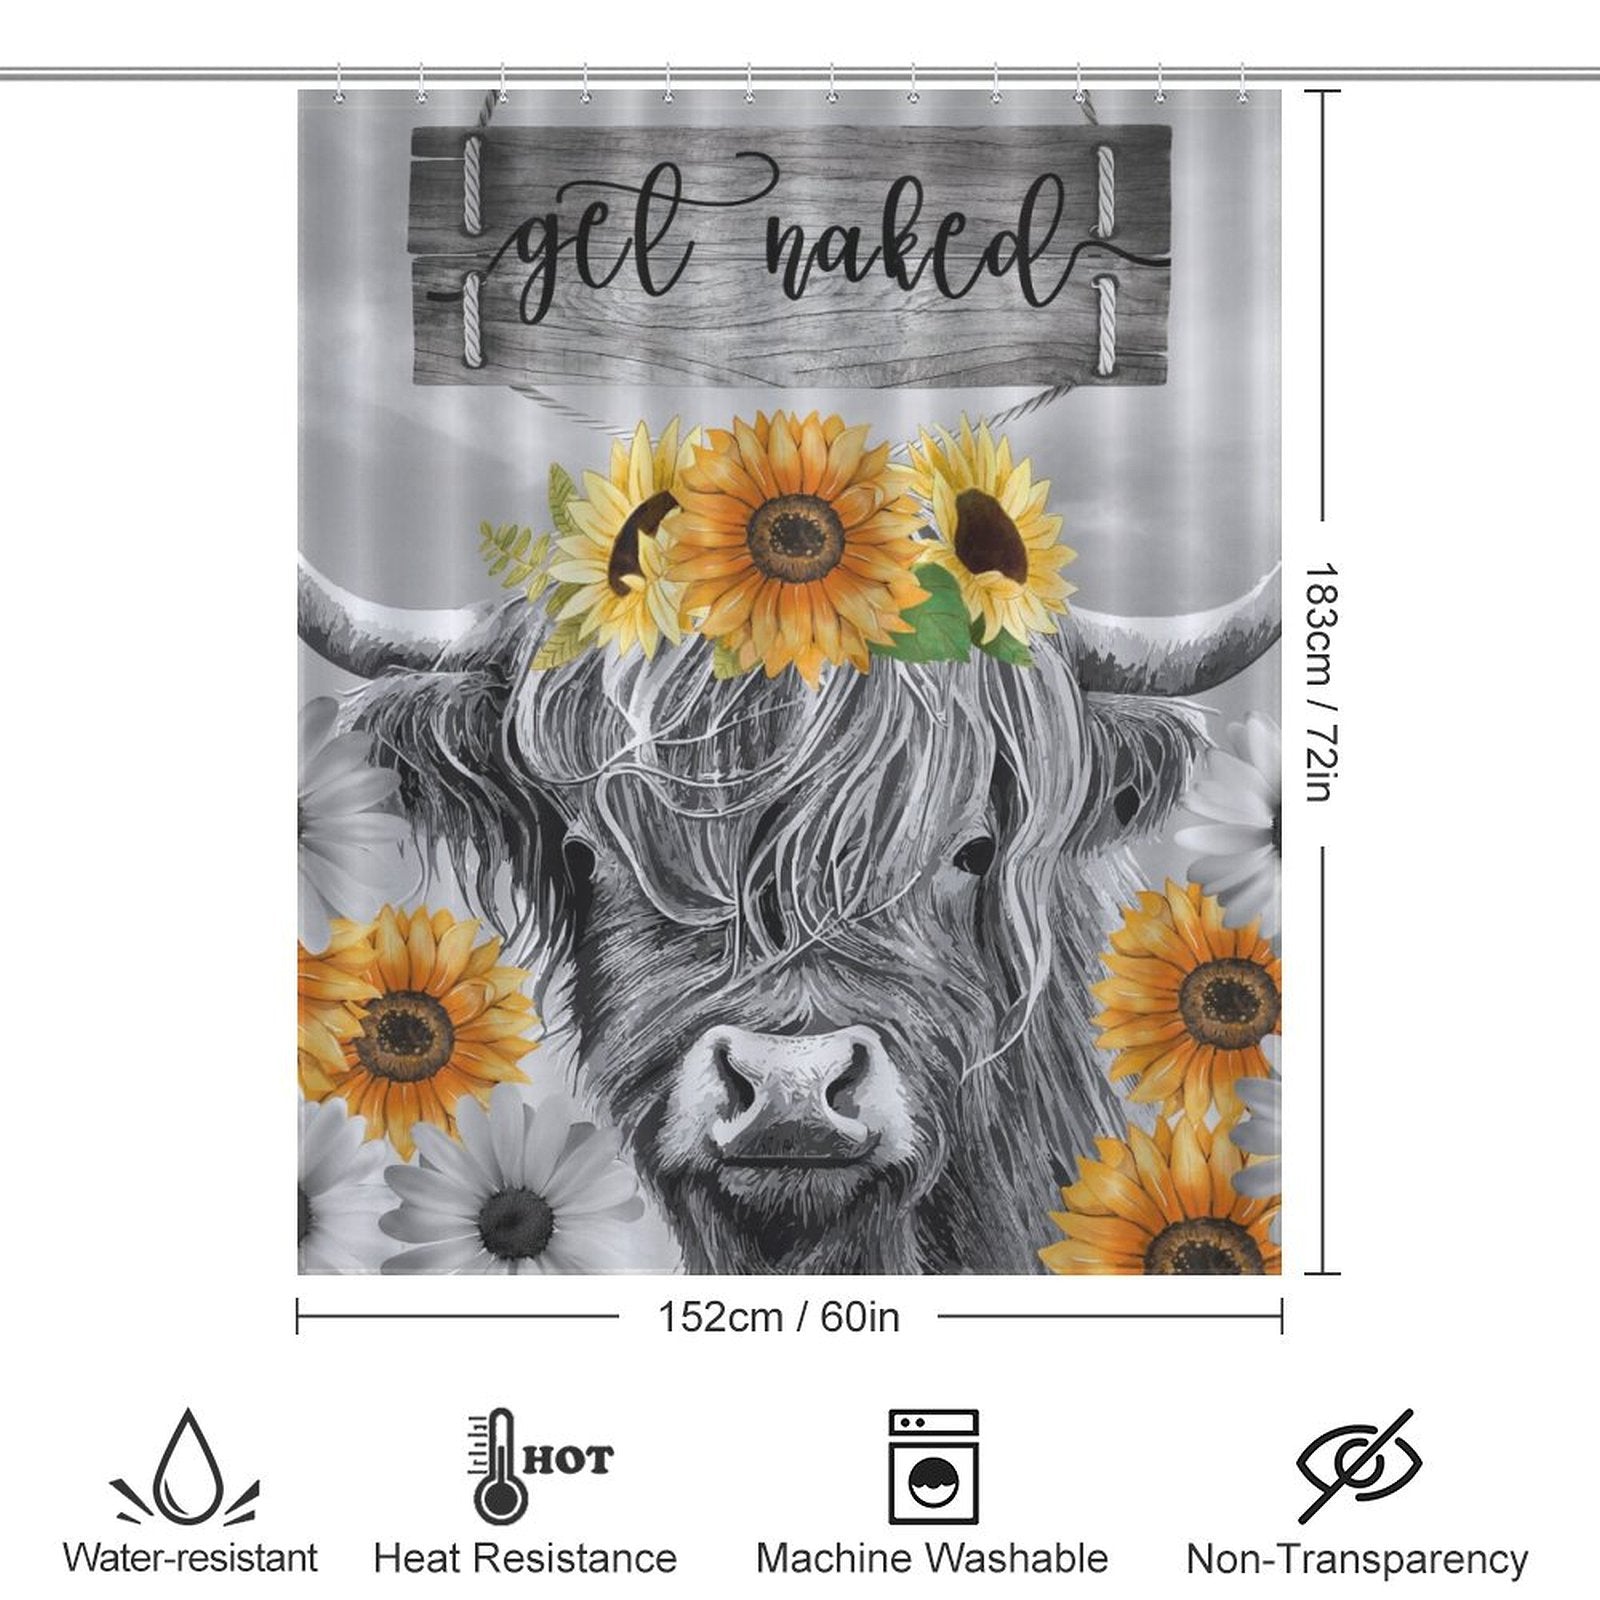 Introducing the Highland Cow Black and White Funny Letters Sunflower Get Naked Shower Curtain-Cottoncat by Cotton Cat, measuring 183 cm by 152 cm and featuring a charming buffalo with a sunflower crown. Perfect for black and white bathroom decor, this highland cow shower curtain is water-resistant, heat-resistant, machine washable, and non-transparent.